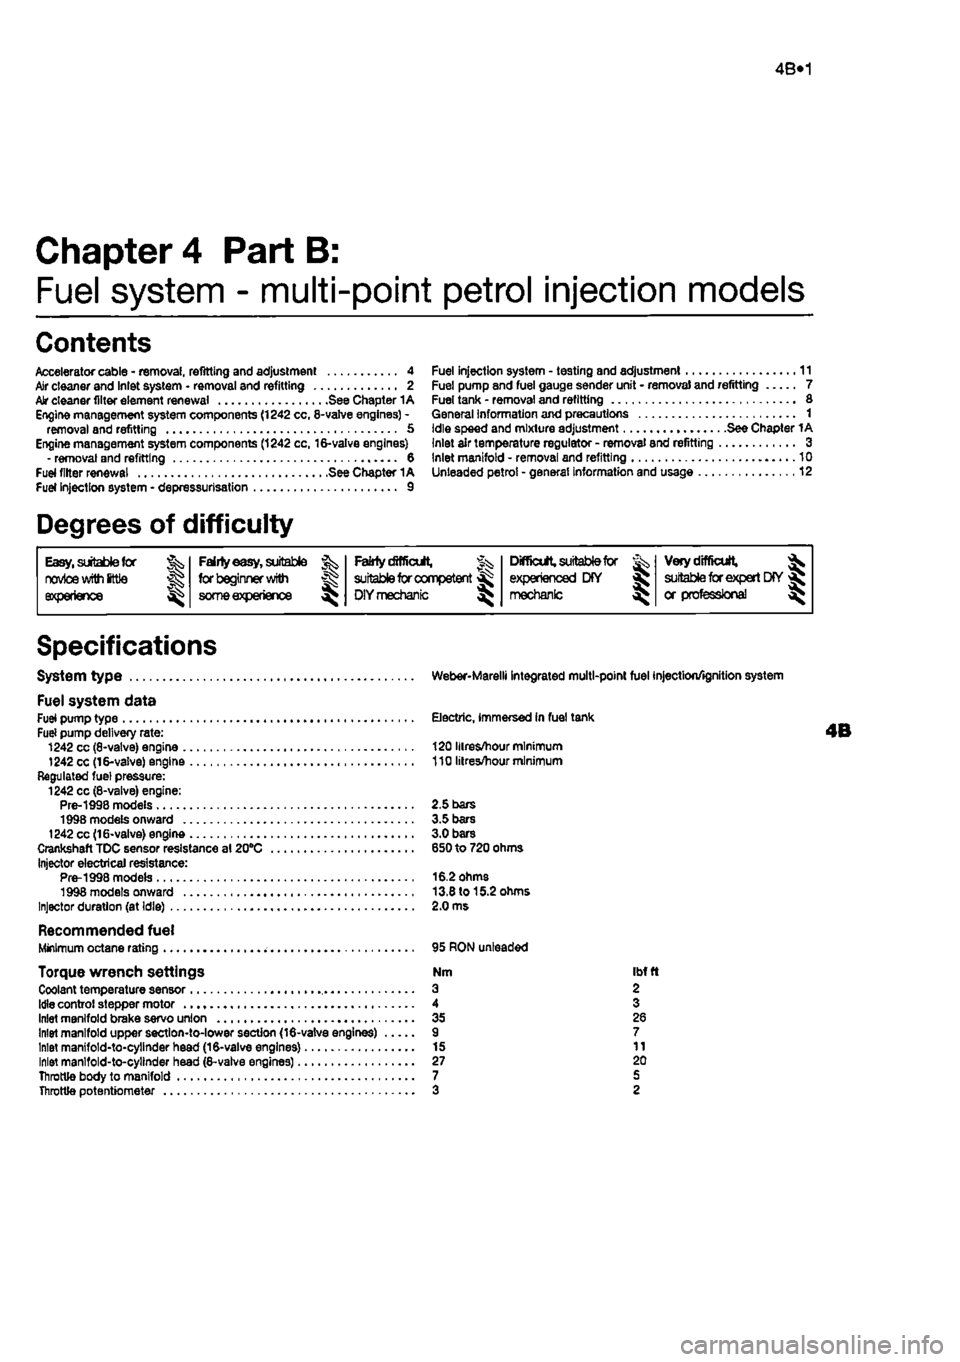 FIAT PUNTO 1994 176 / 1.G Owners Manual 
4B*1 
Chapter 4 Part B: 
Fuel system - multi-point petrol injection models 
Contents 
Accelerator cable - removal, refitting and adjustment 4 Air cleaner and Inlet system • removal and refitting 2 